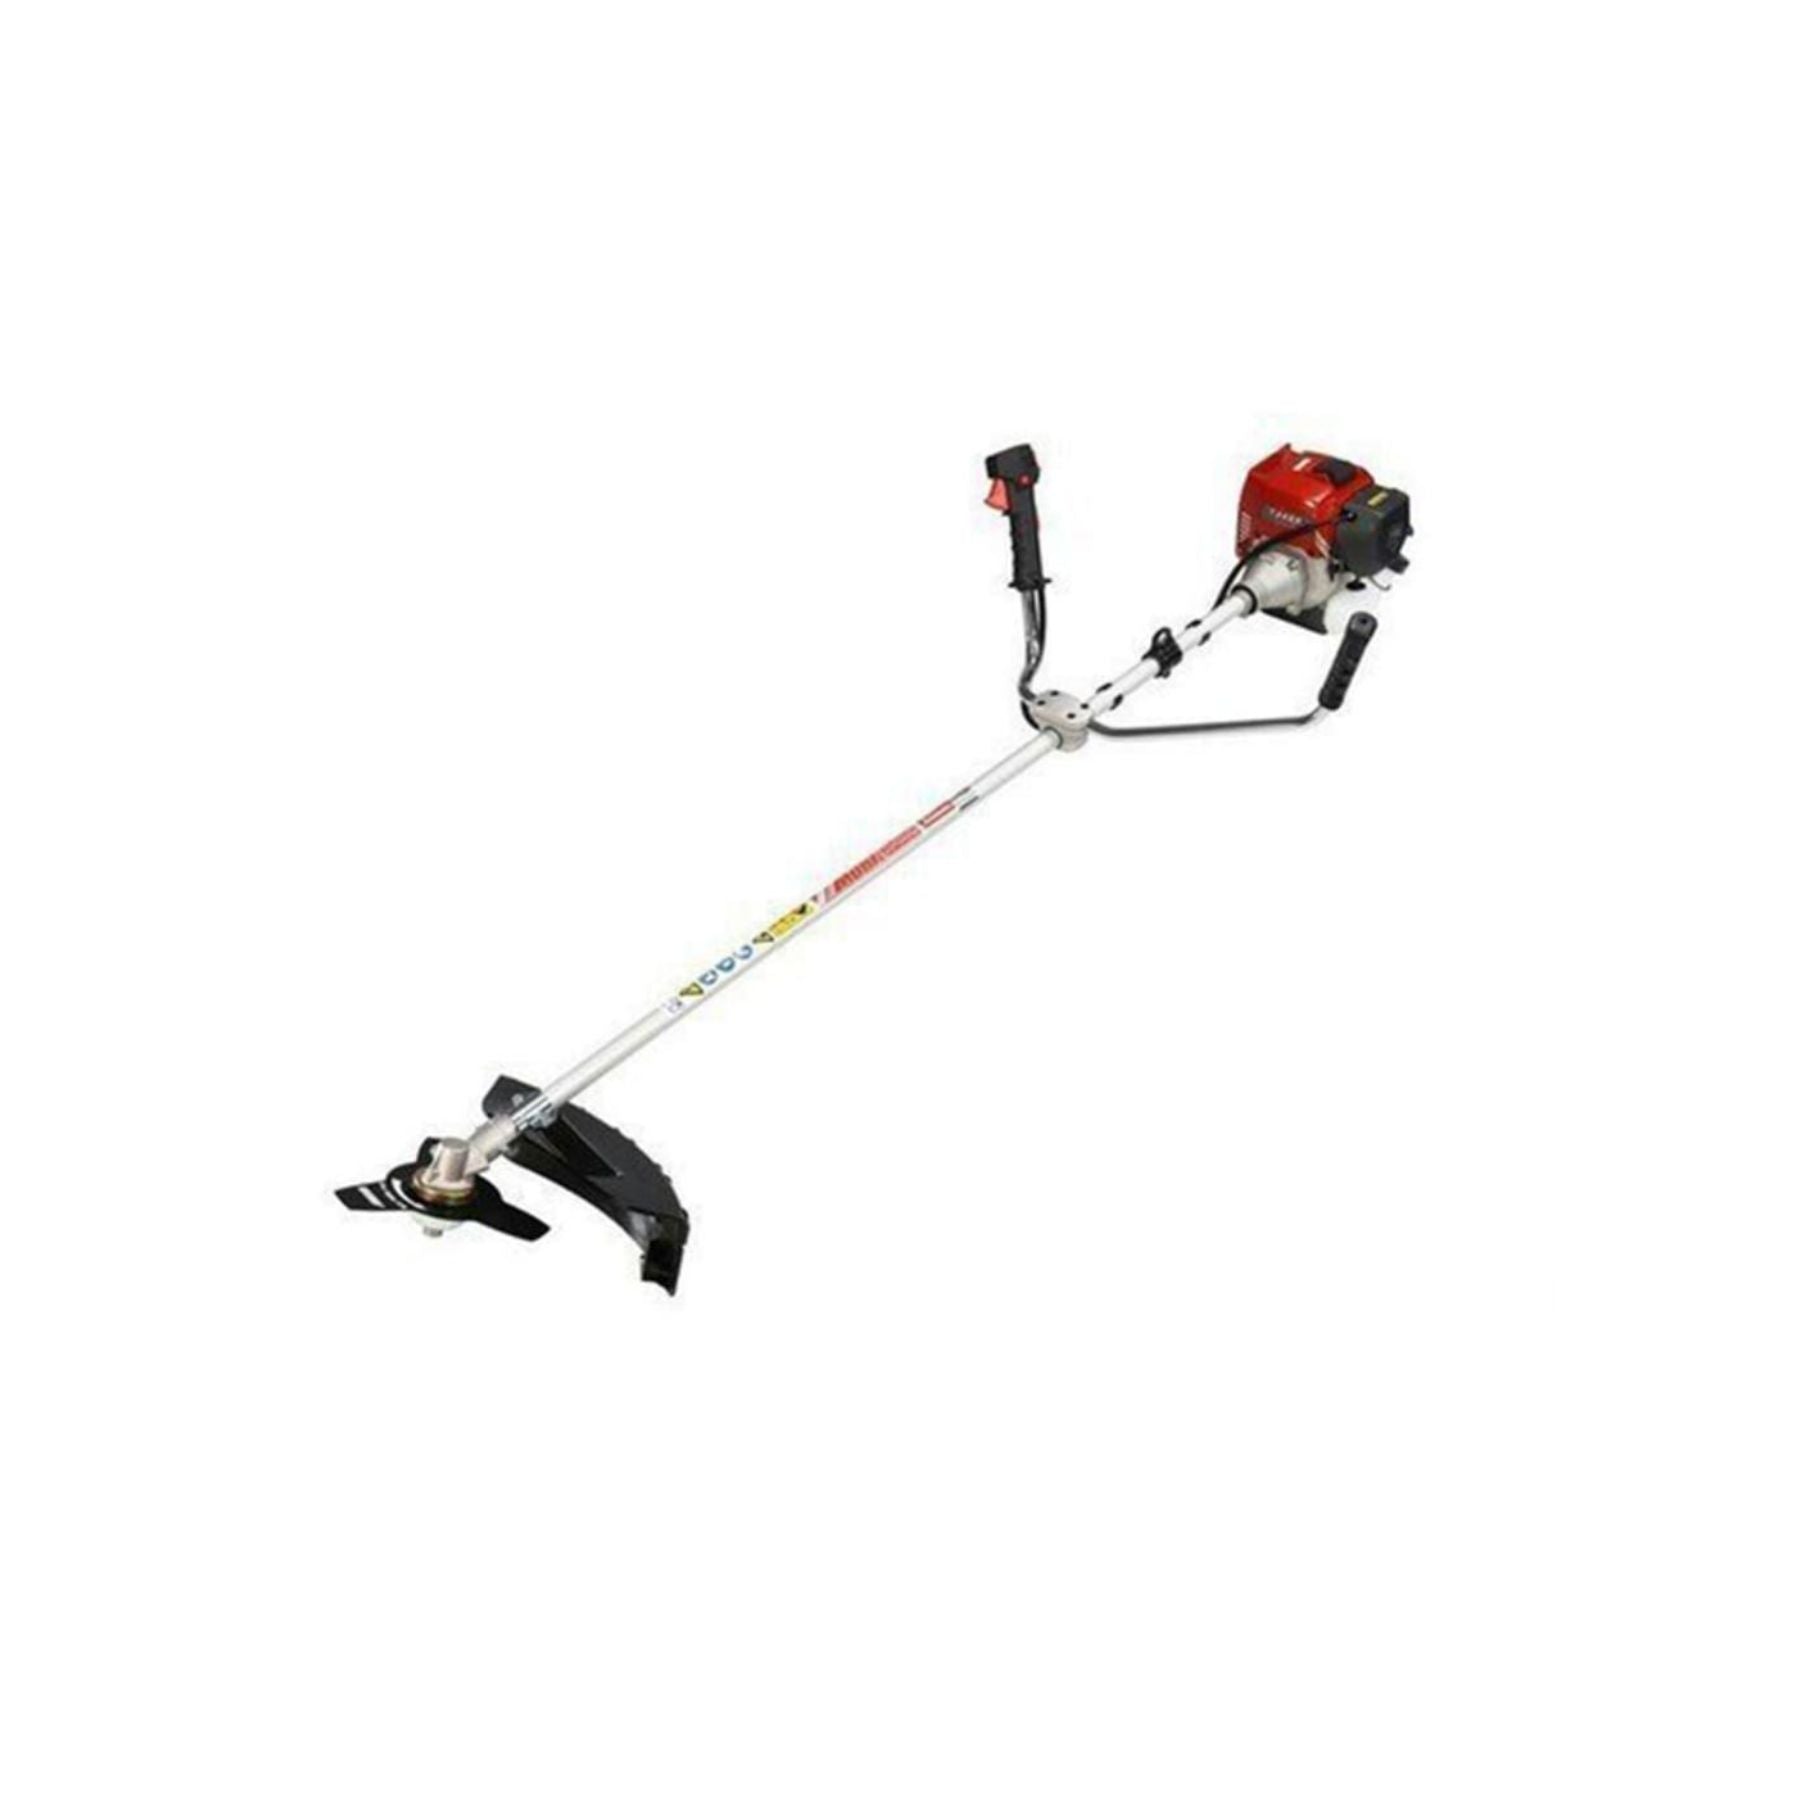 Rover Back Pack Brush Cutter RB 943